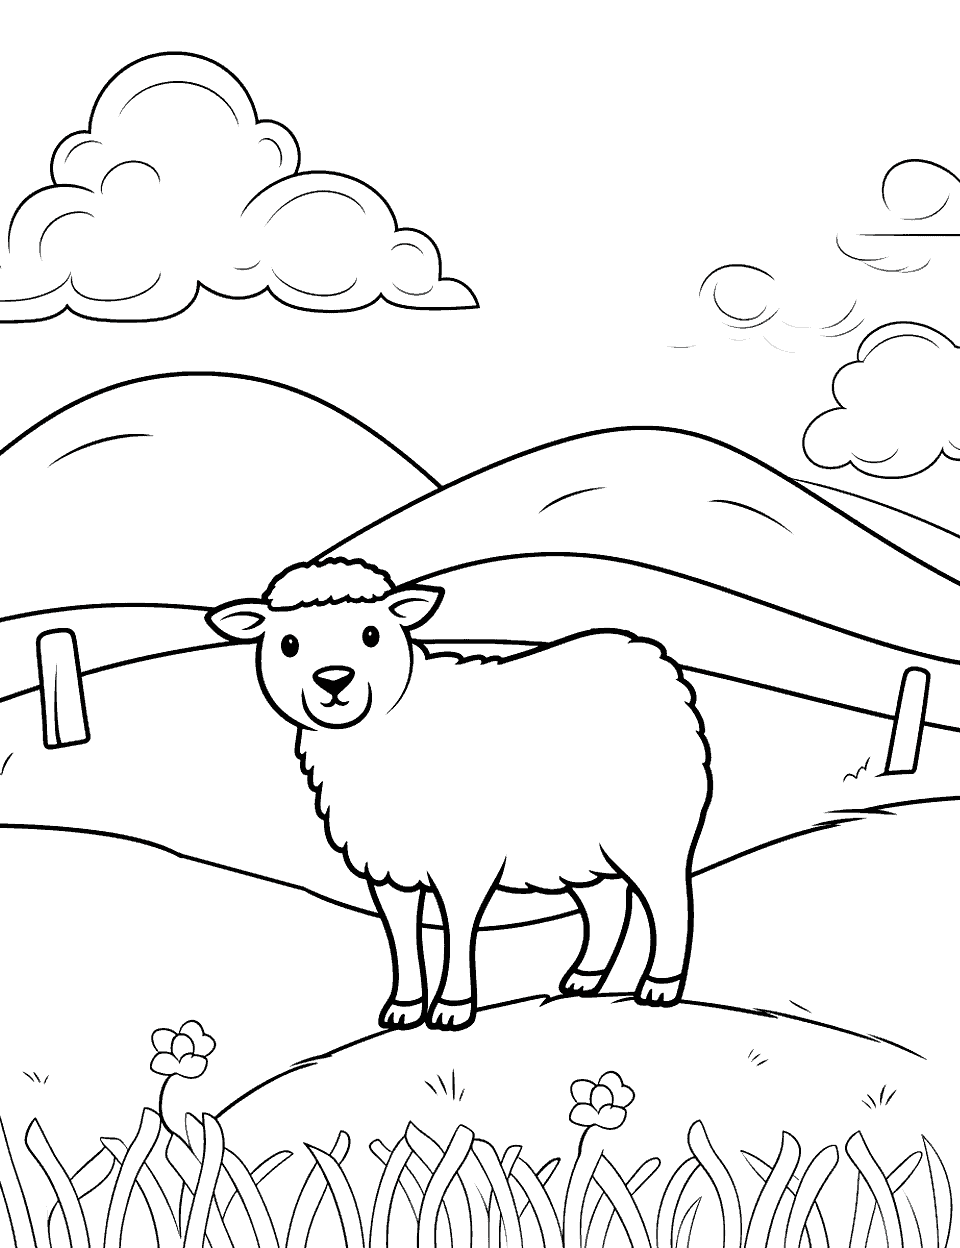 Sheep Grazing on a Hill Farm Coloring Page - A single sheep grazing on a gentle hill.